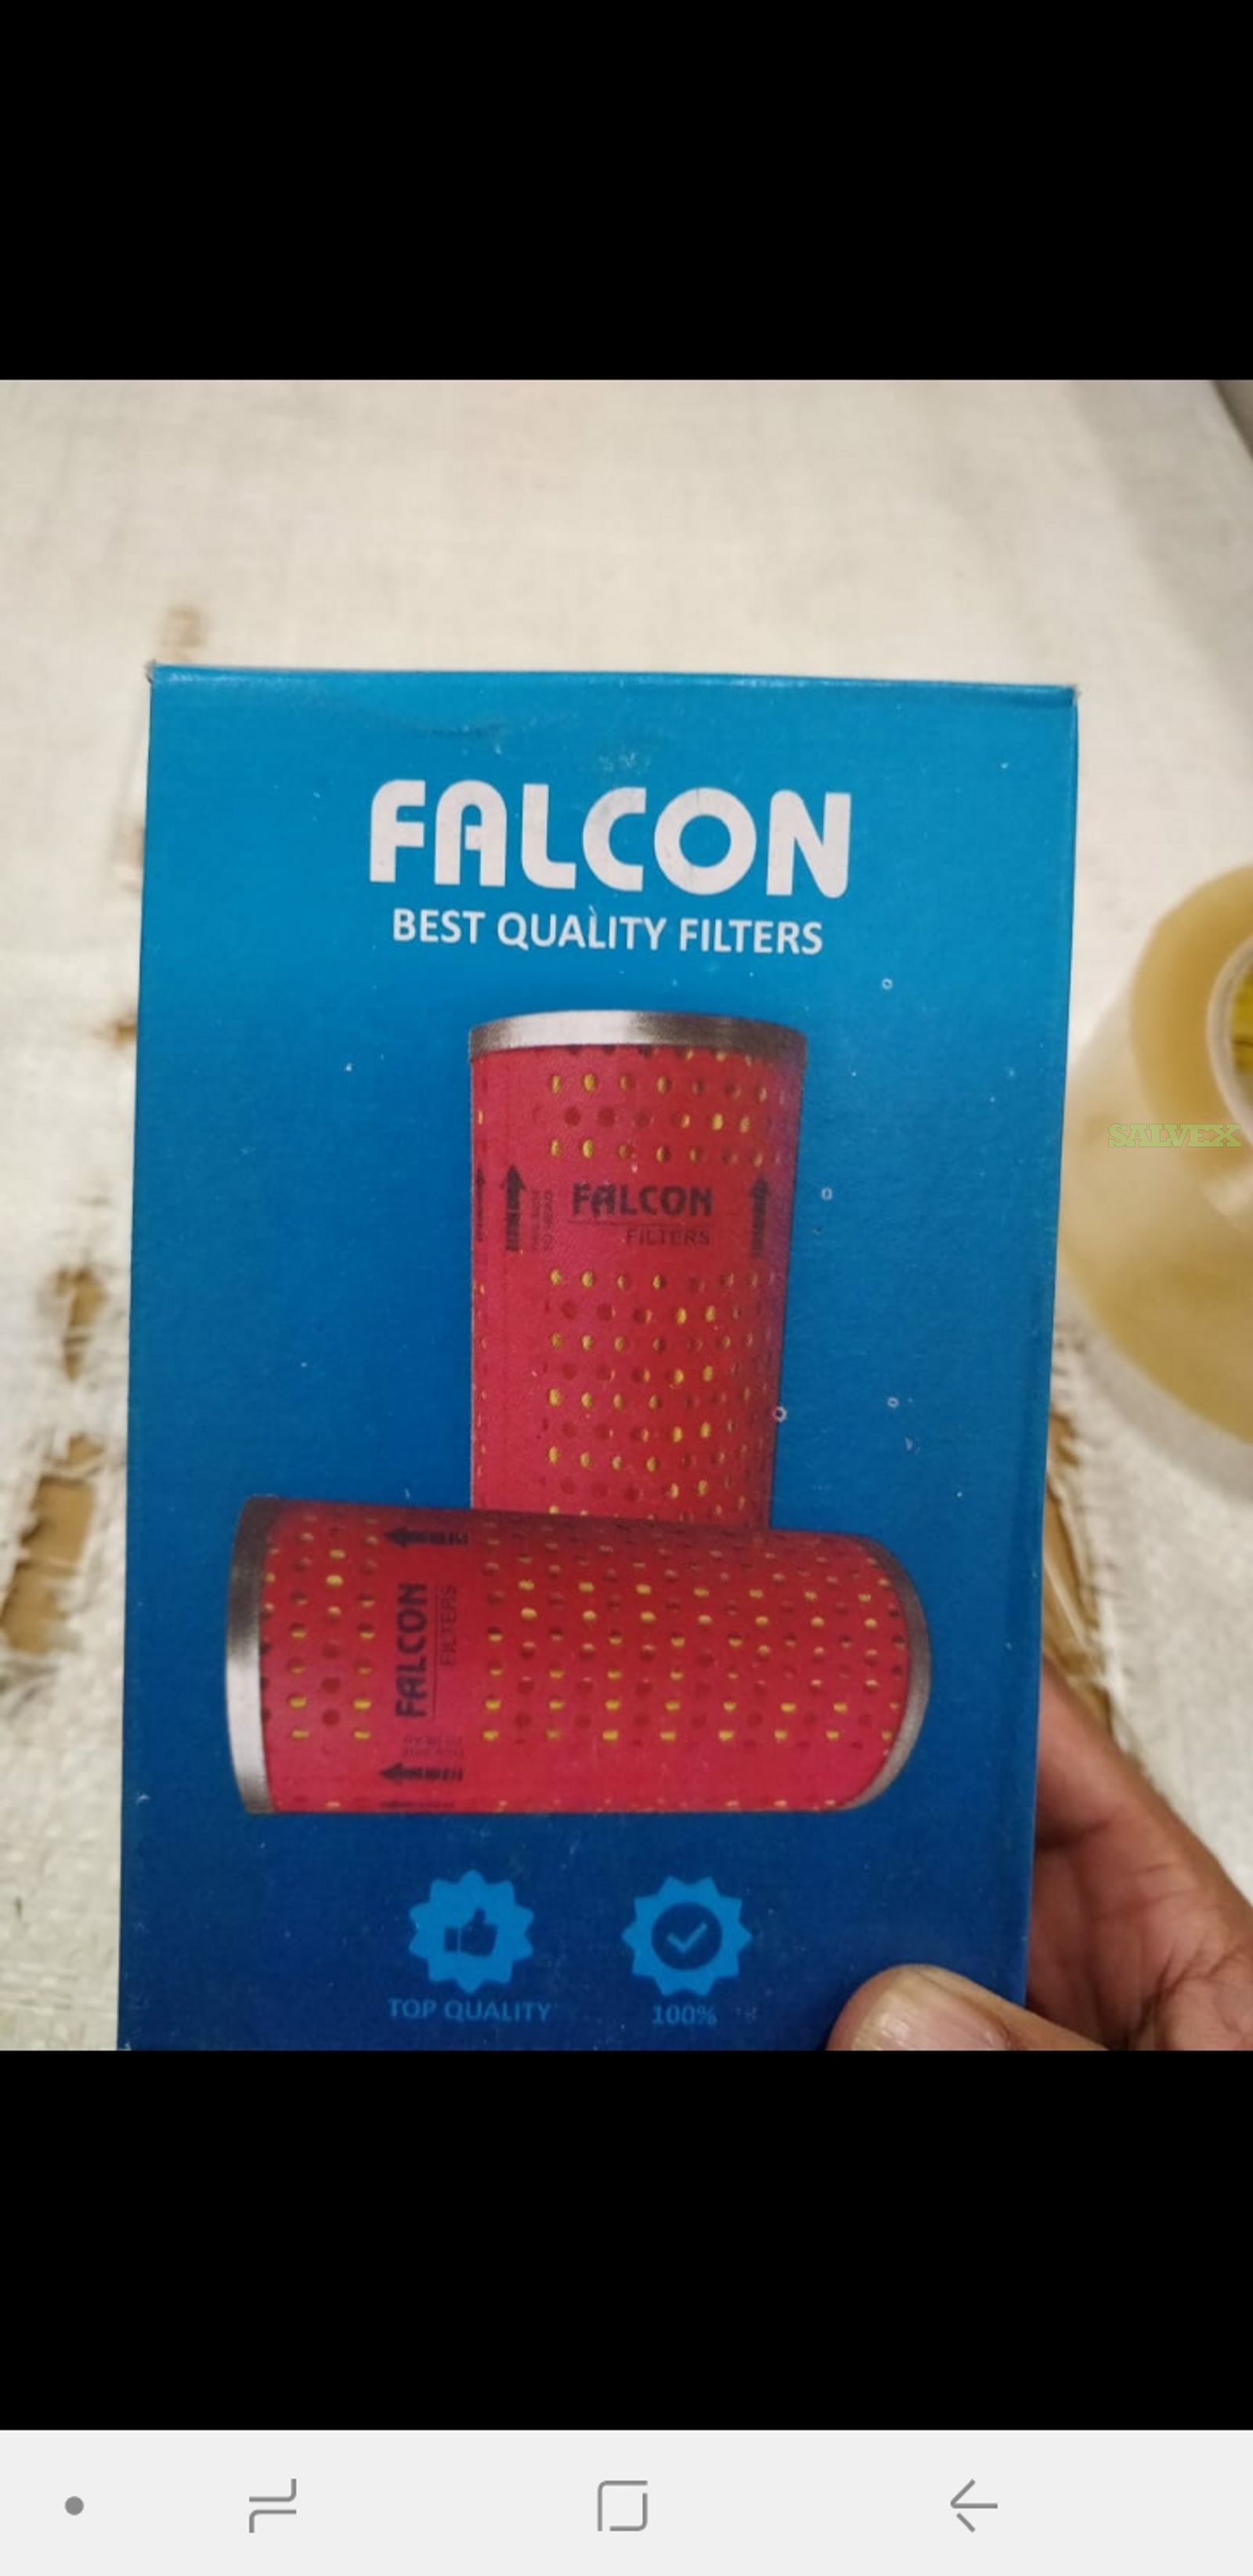 Falcon and Starmax Diesel Car Oil Filters (76,000 Units)